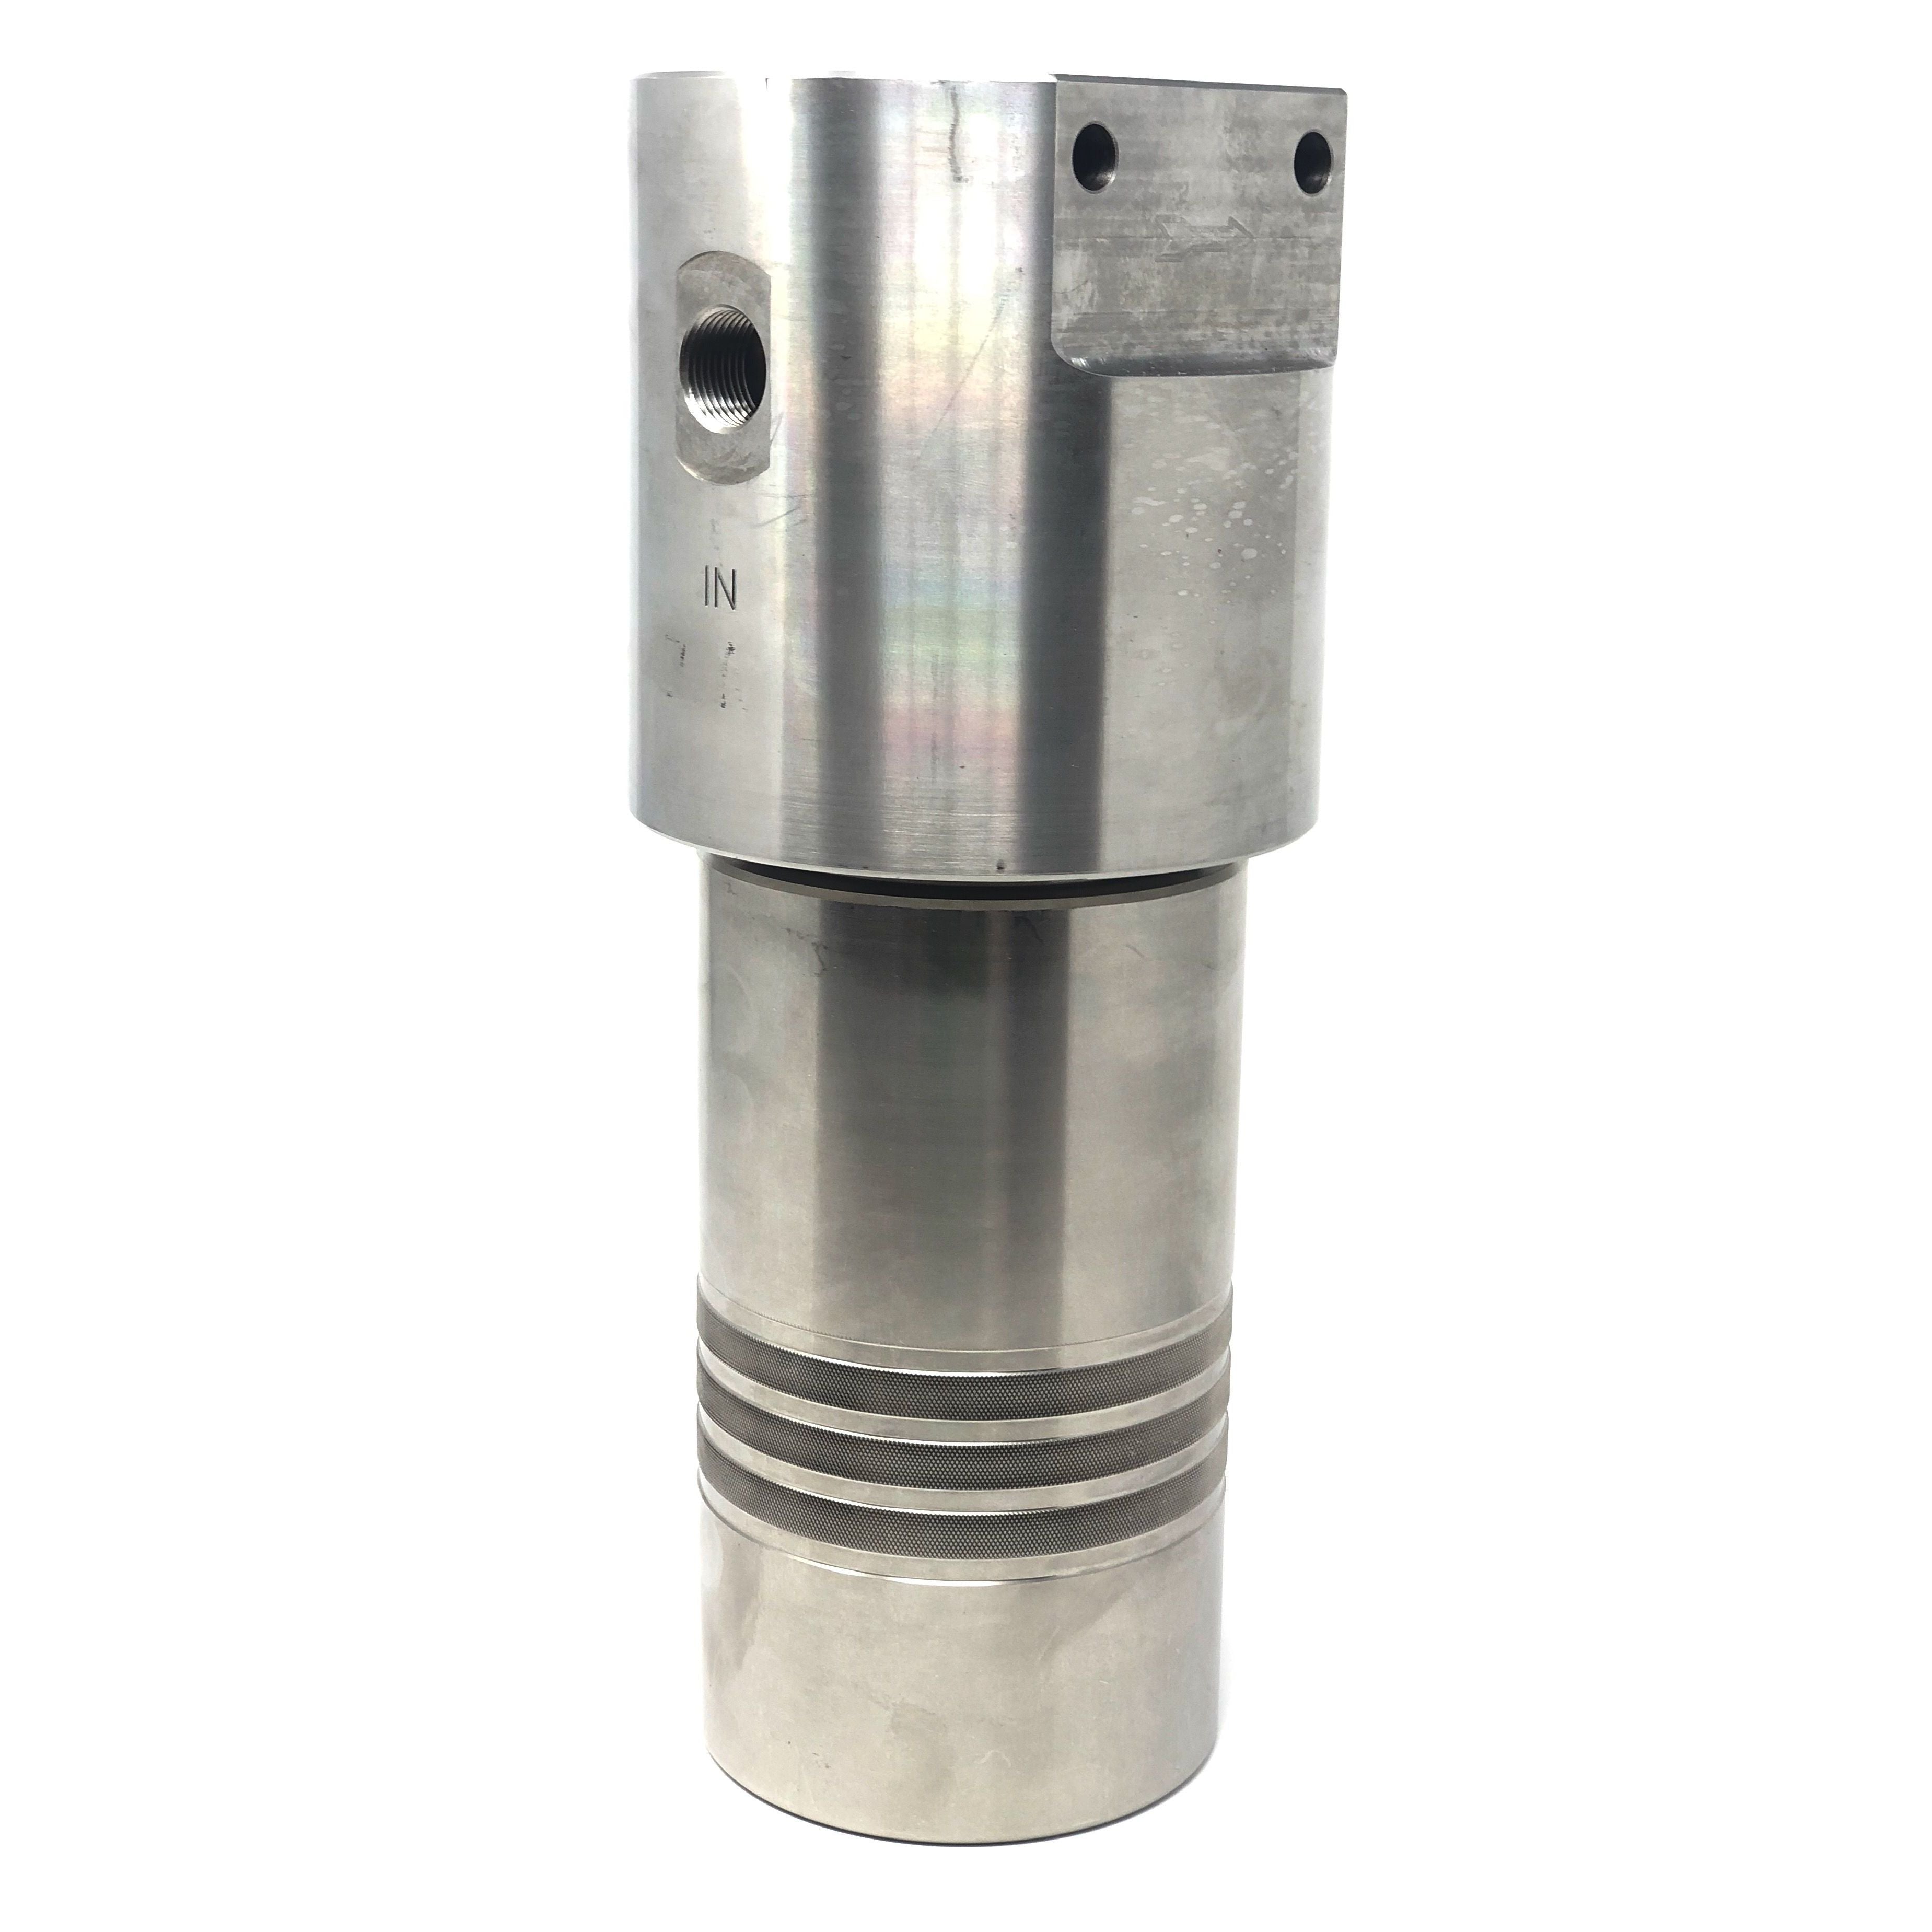 52S-168N-25SEN : Chase Ultra High Pressure Inline Filter, 10000psi, 1/2" NPT, 25 Micron, With Visual Indicator, No Bypass